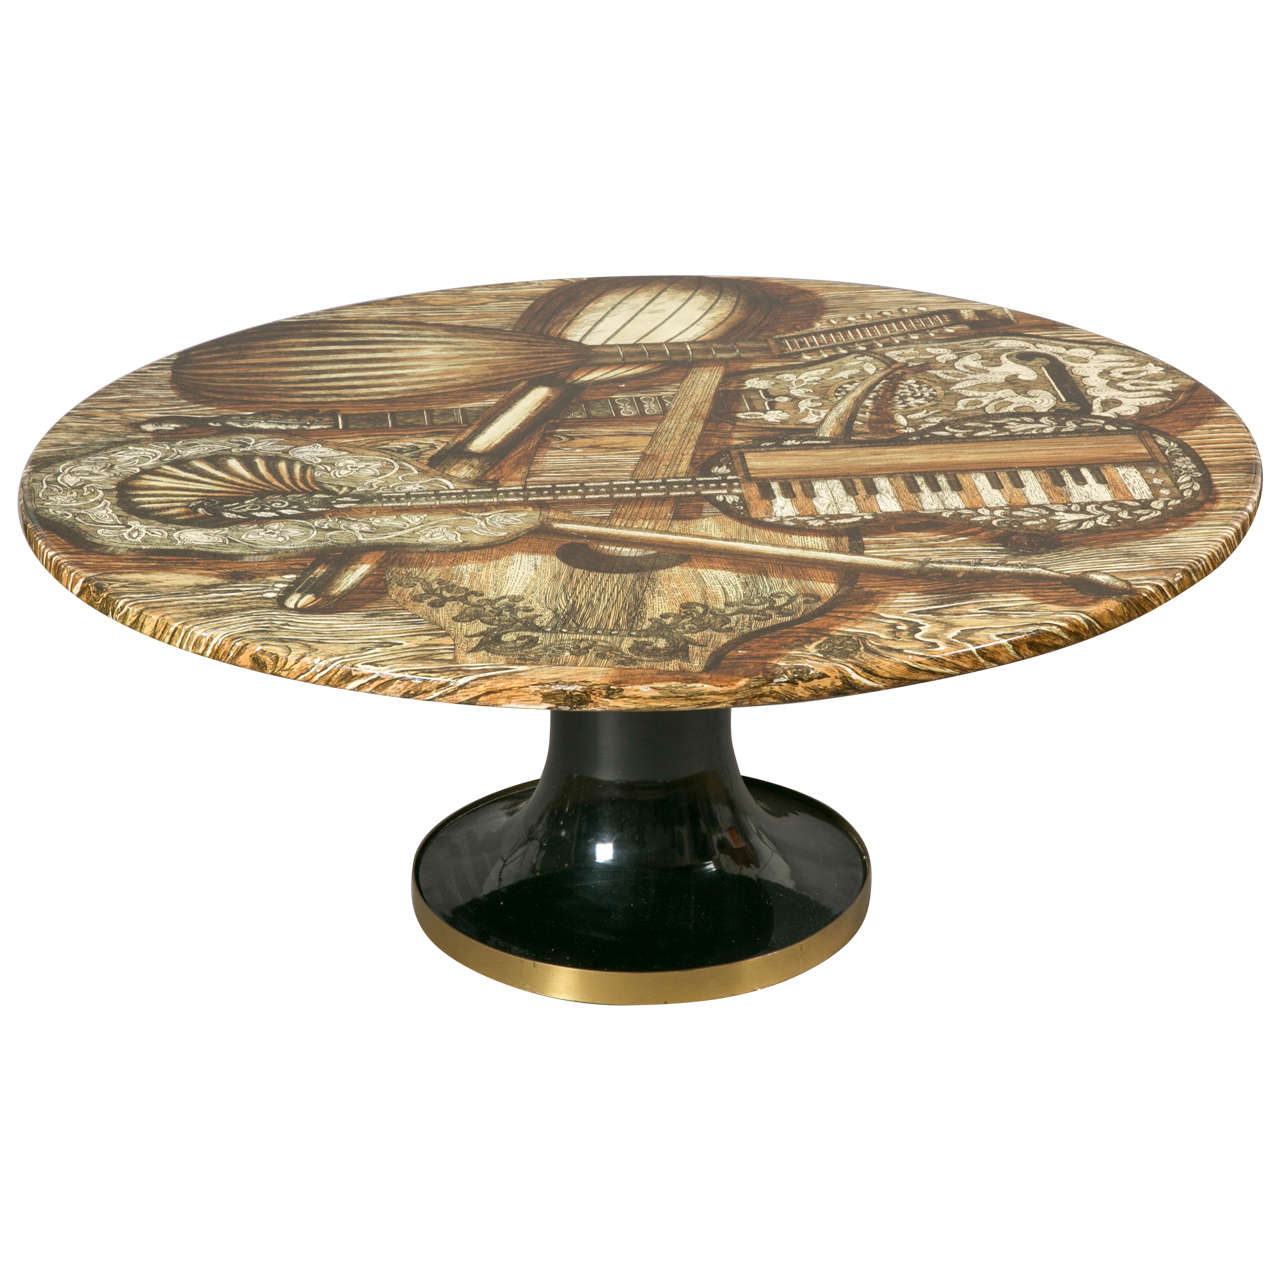 Coffee Table with Music Instruments Design, 1950s, by P. Fornasetti, Italy.